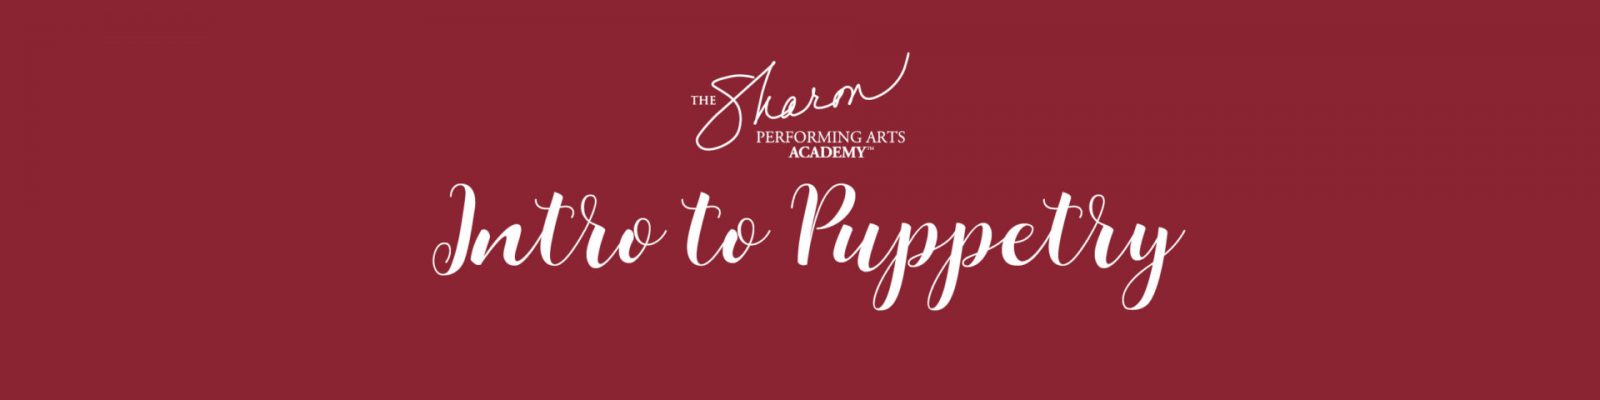 SPAC310_PAA_Into to Puppetry_ENT InvShow Header_1022